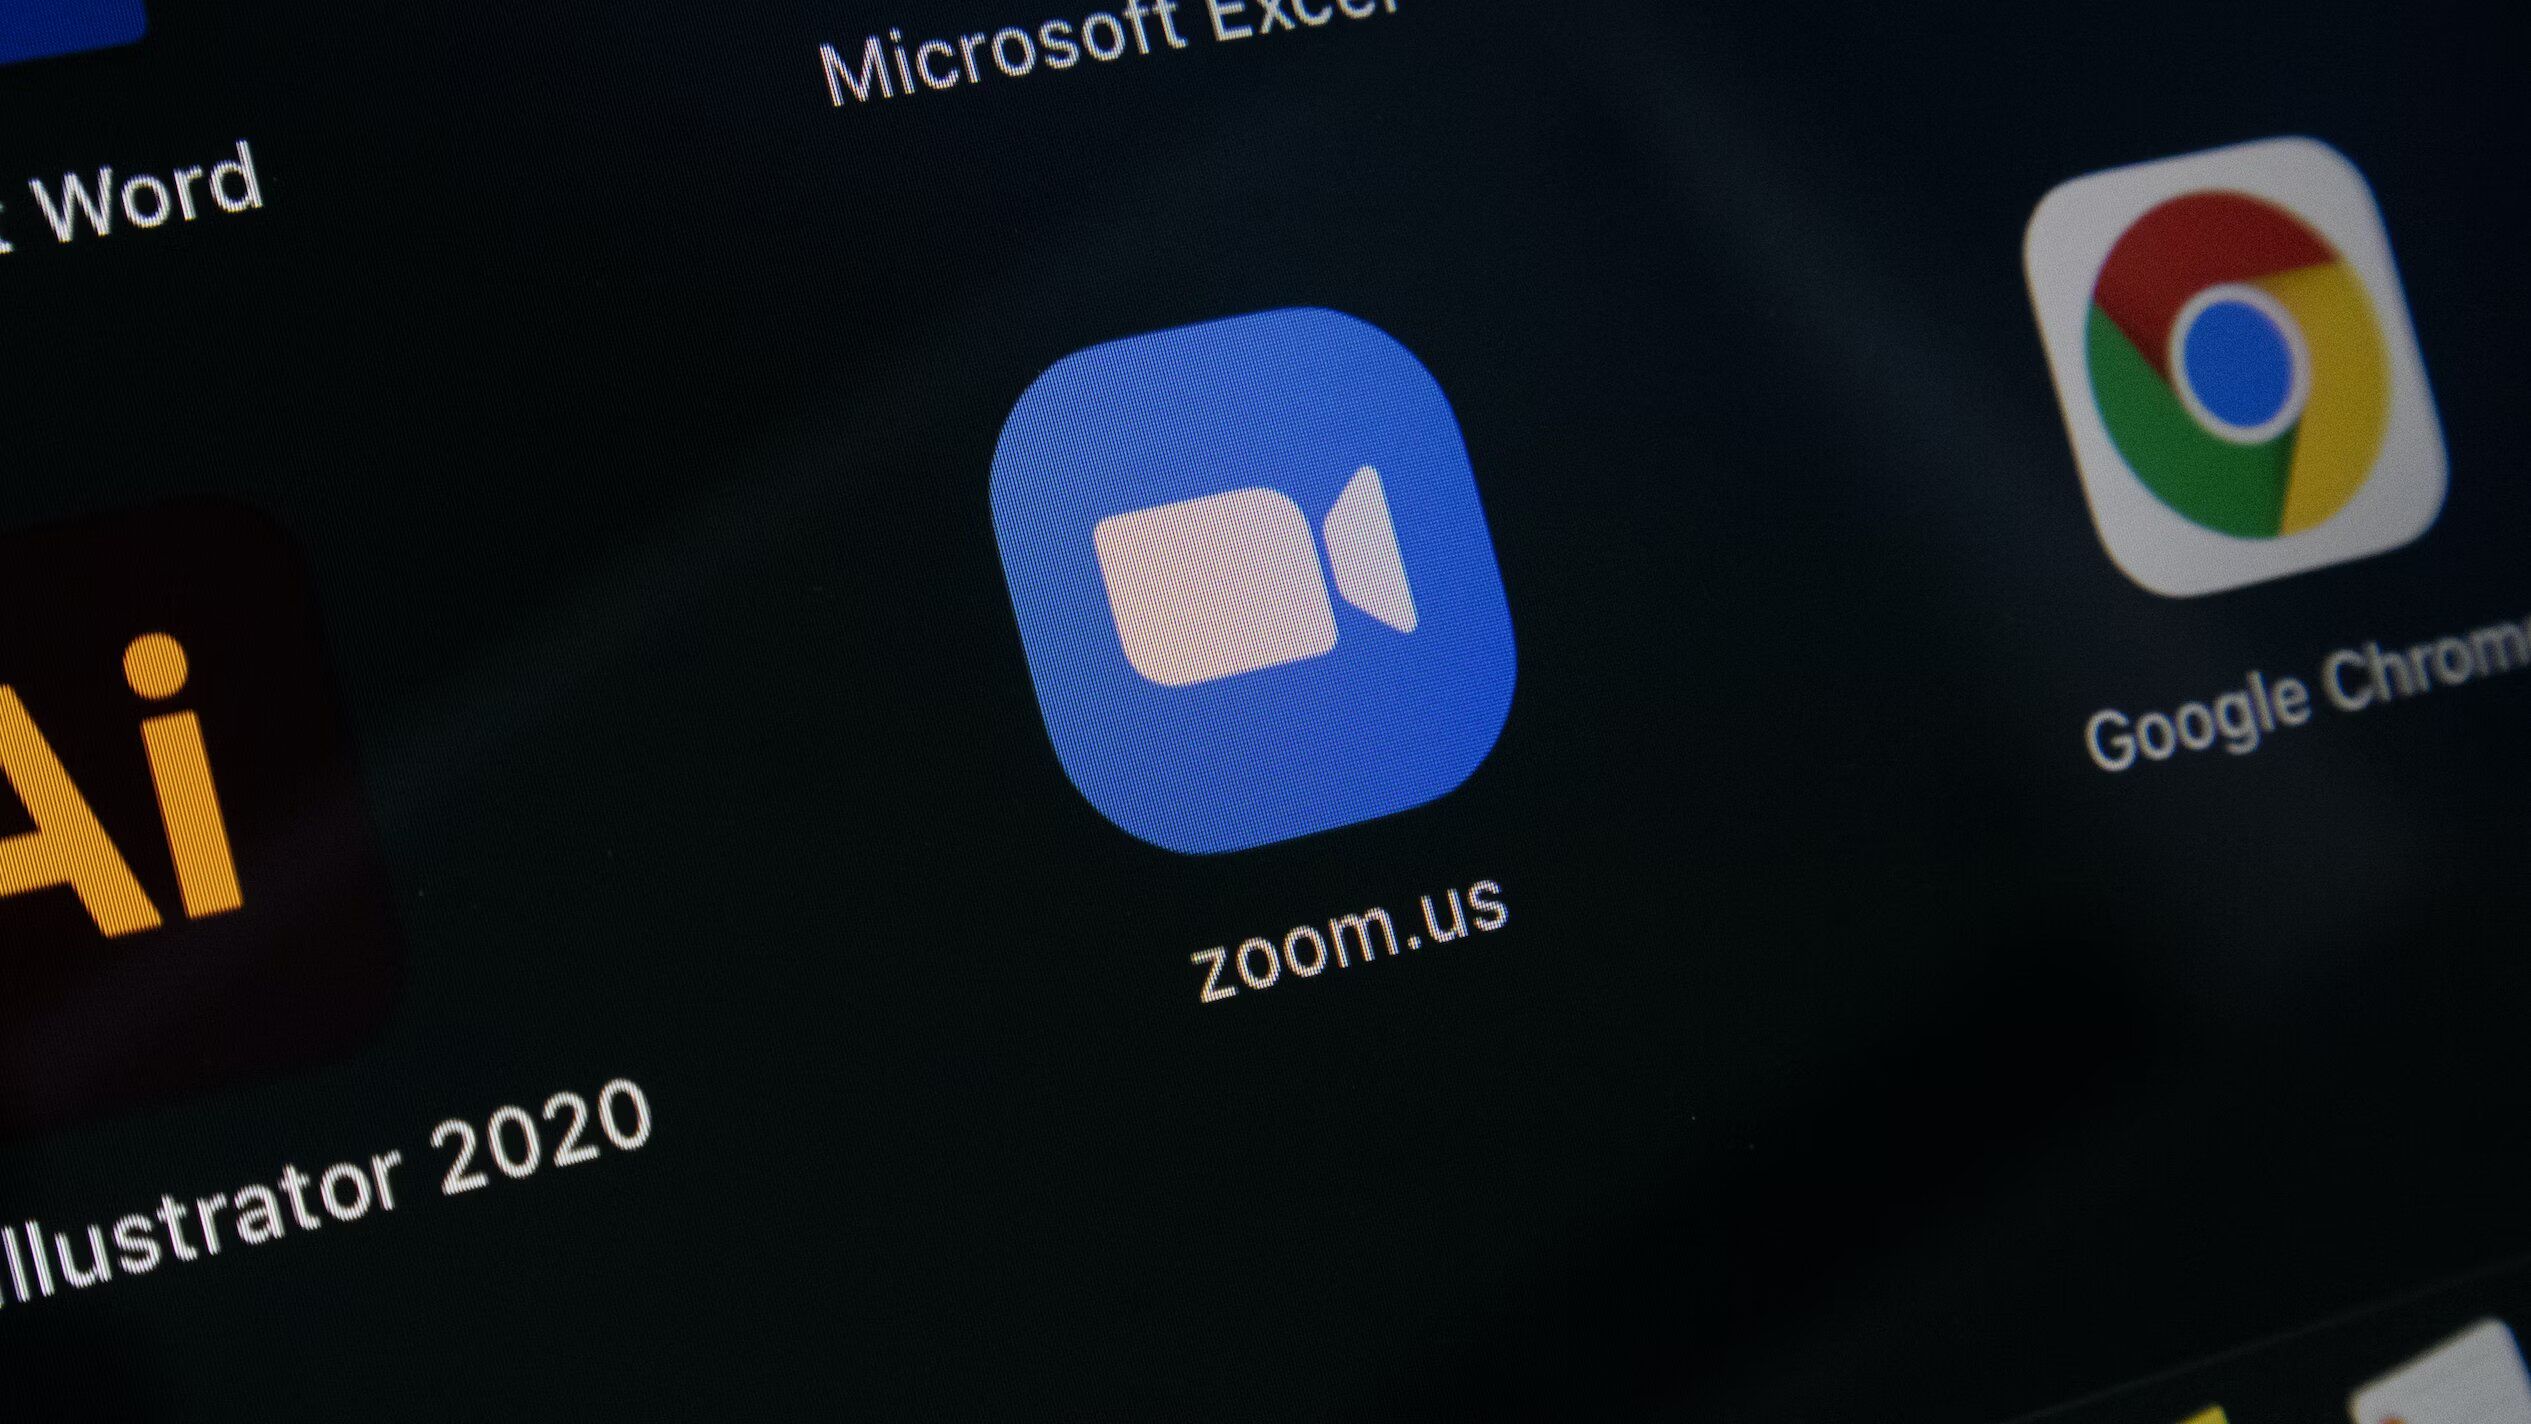 Getting Started with Zoom